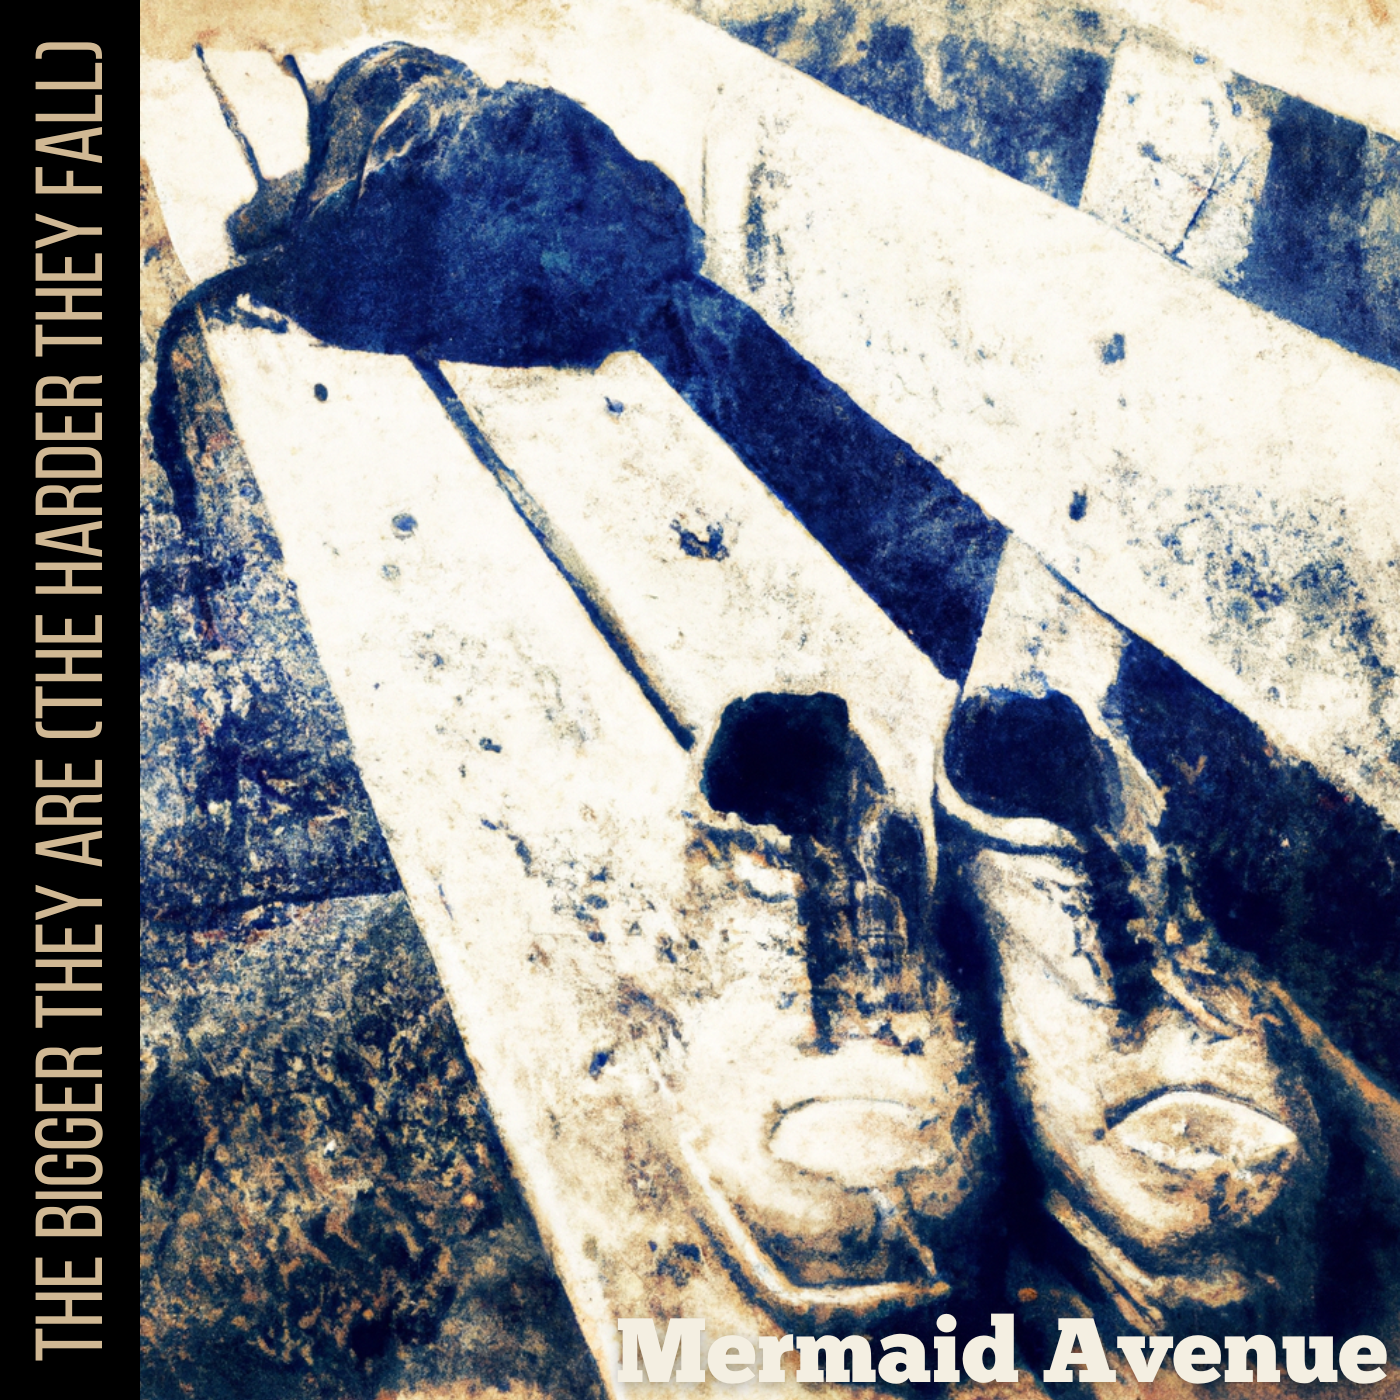 Mermaid Avenue’s new single is deeply personal and wonderfully made